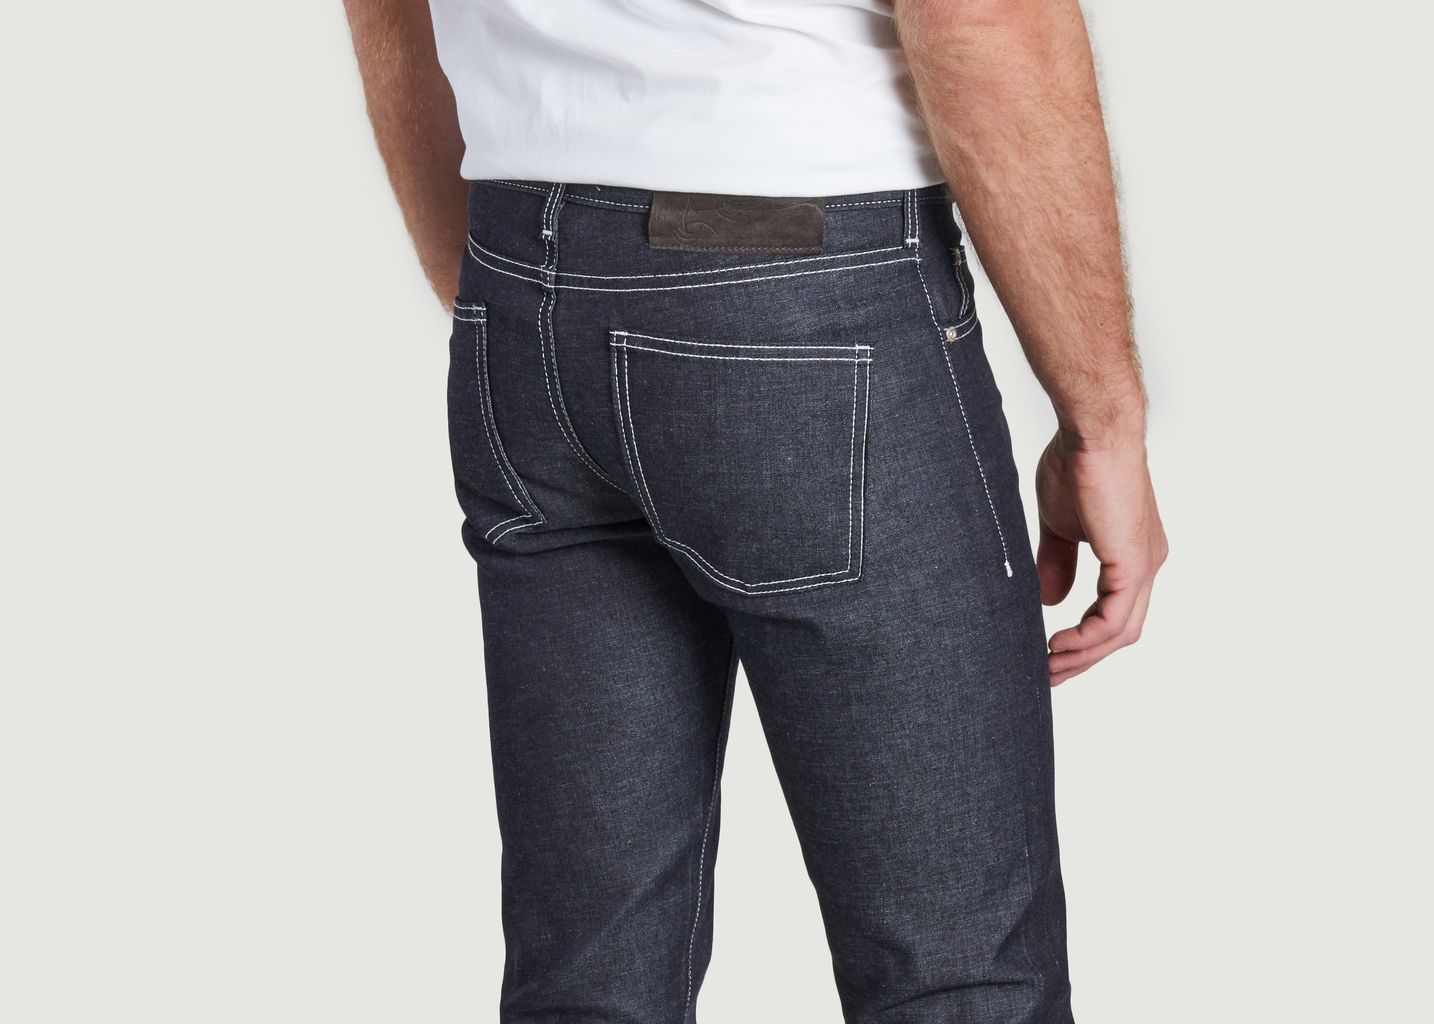 Jean Blue Jay Selvedge Super Guy - Naked and Famous